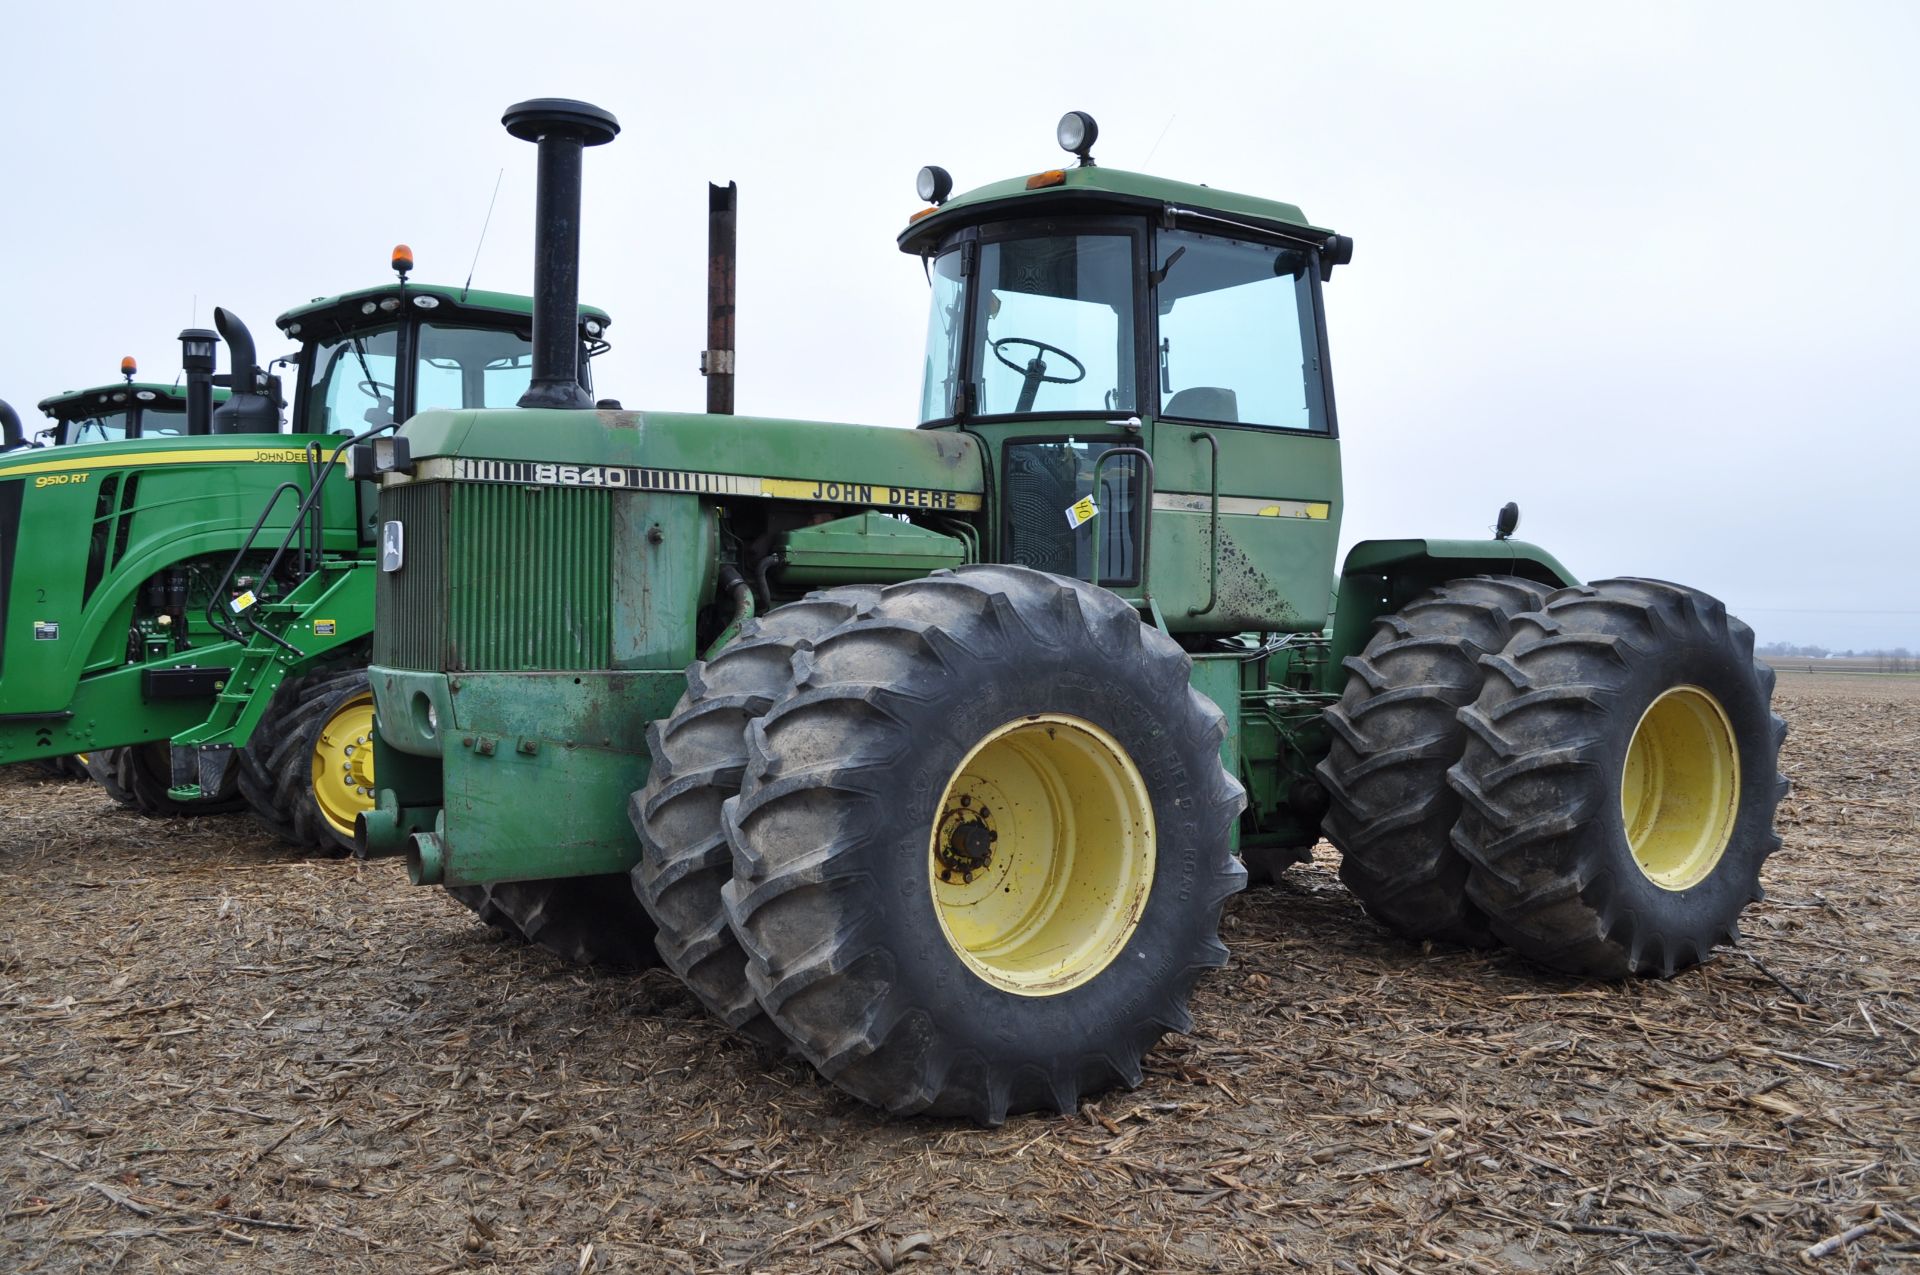 John Deere 8630 4WD tractor, 23.1-30 duals, 3 hyd remotes, 3 pt, quick hitch, 1000 PTO